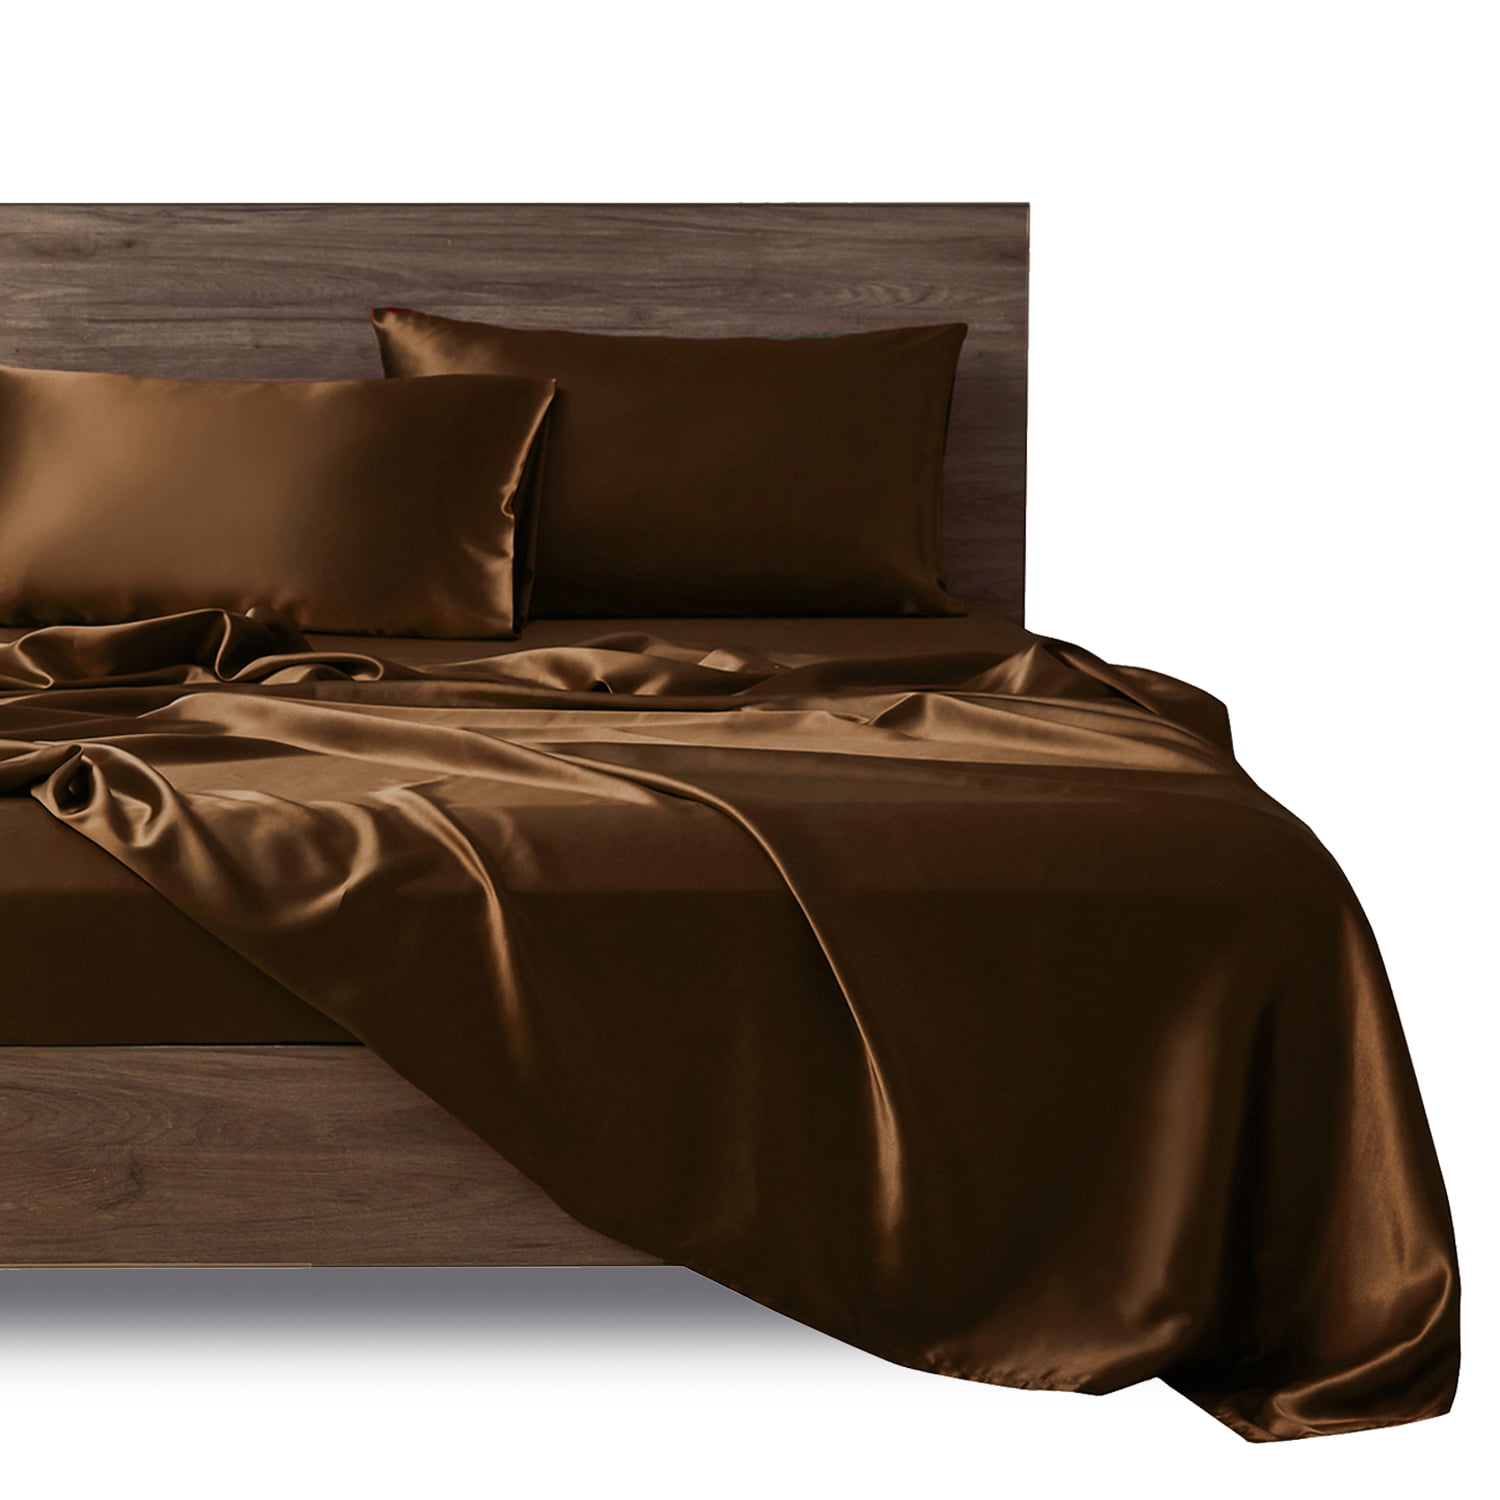 Chocolate Satin Sheet Set 4PC Bedding Wrinkle Free Cheap New Full King Queen 